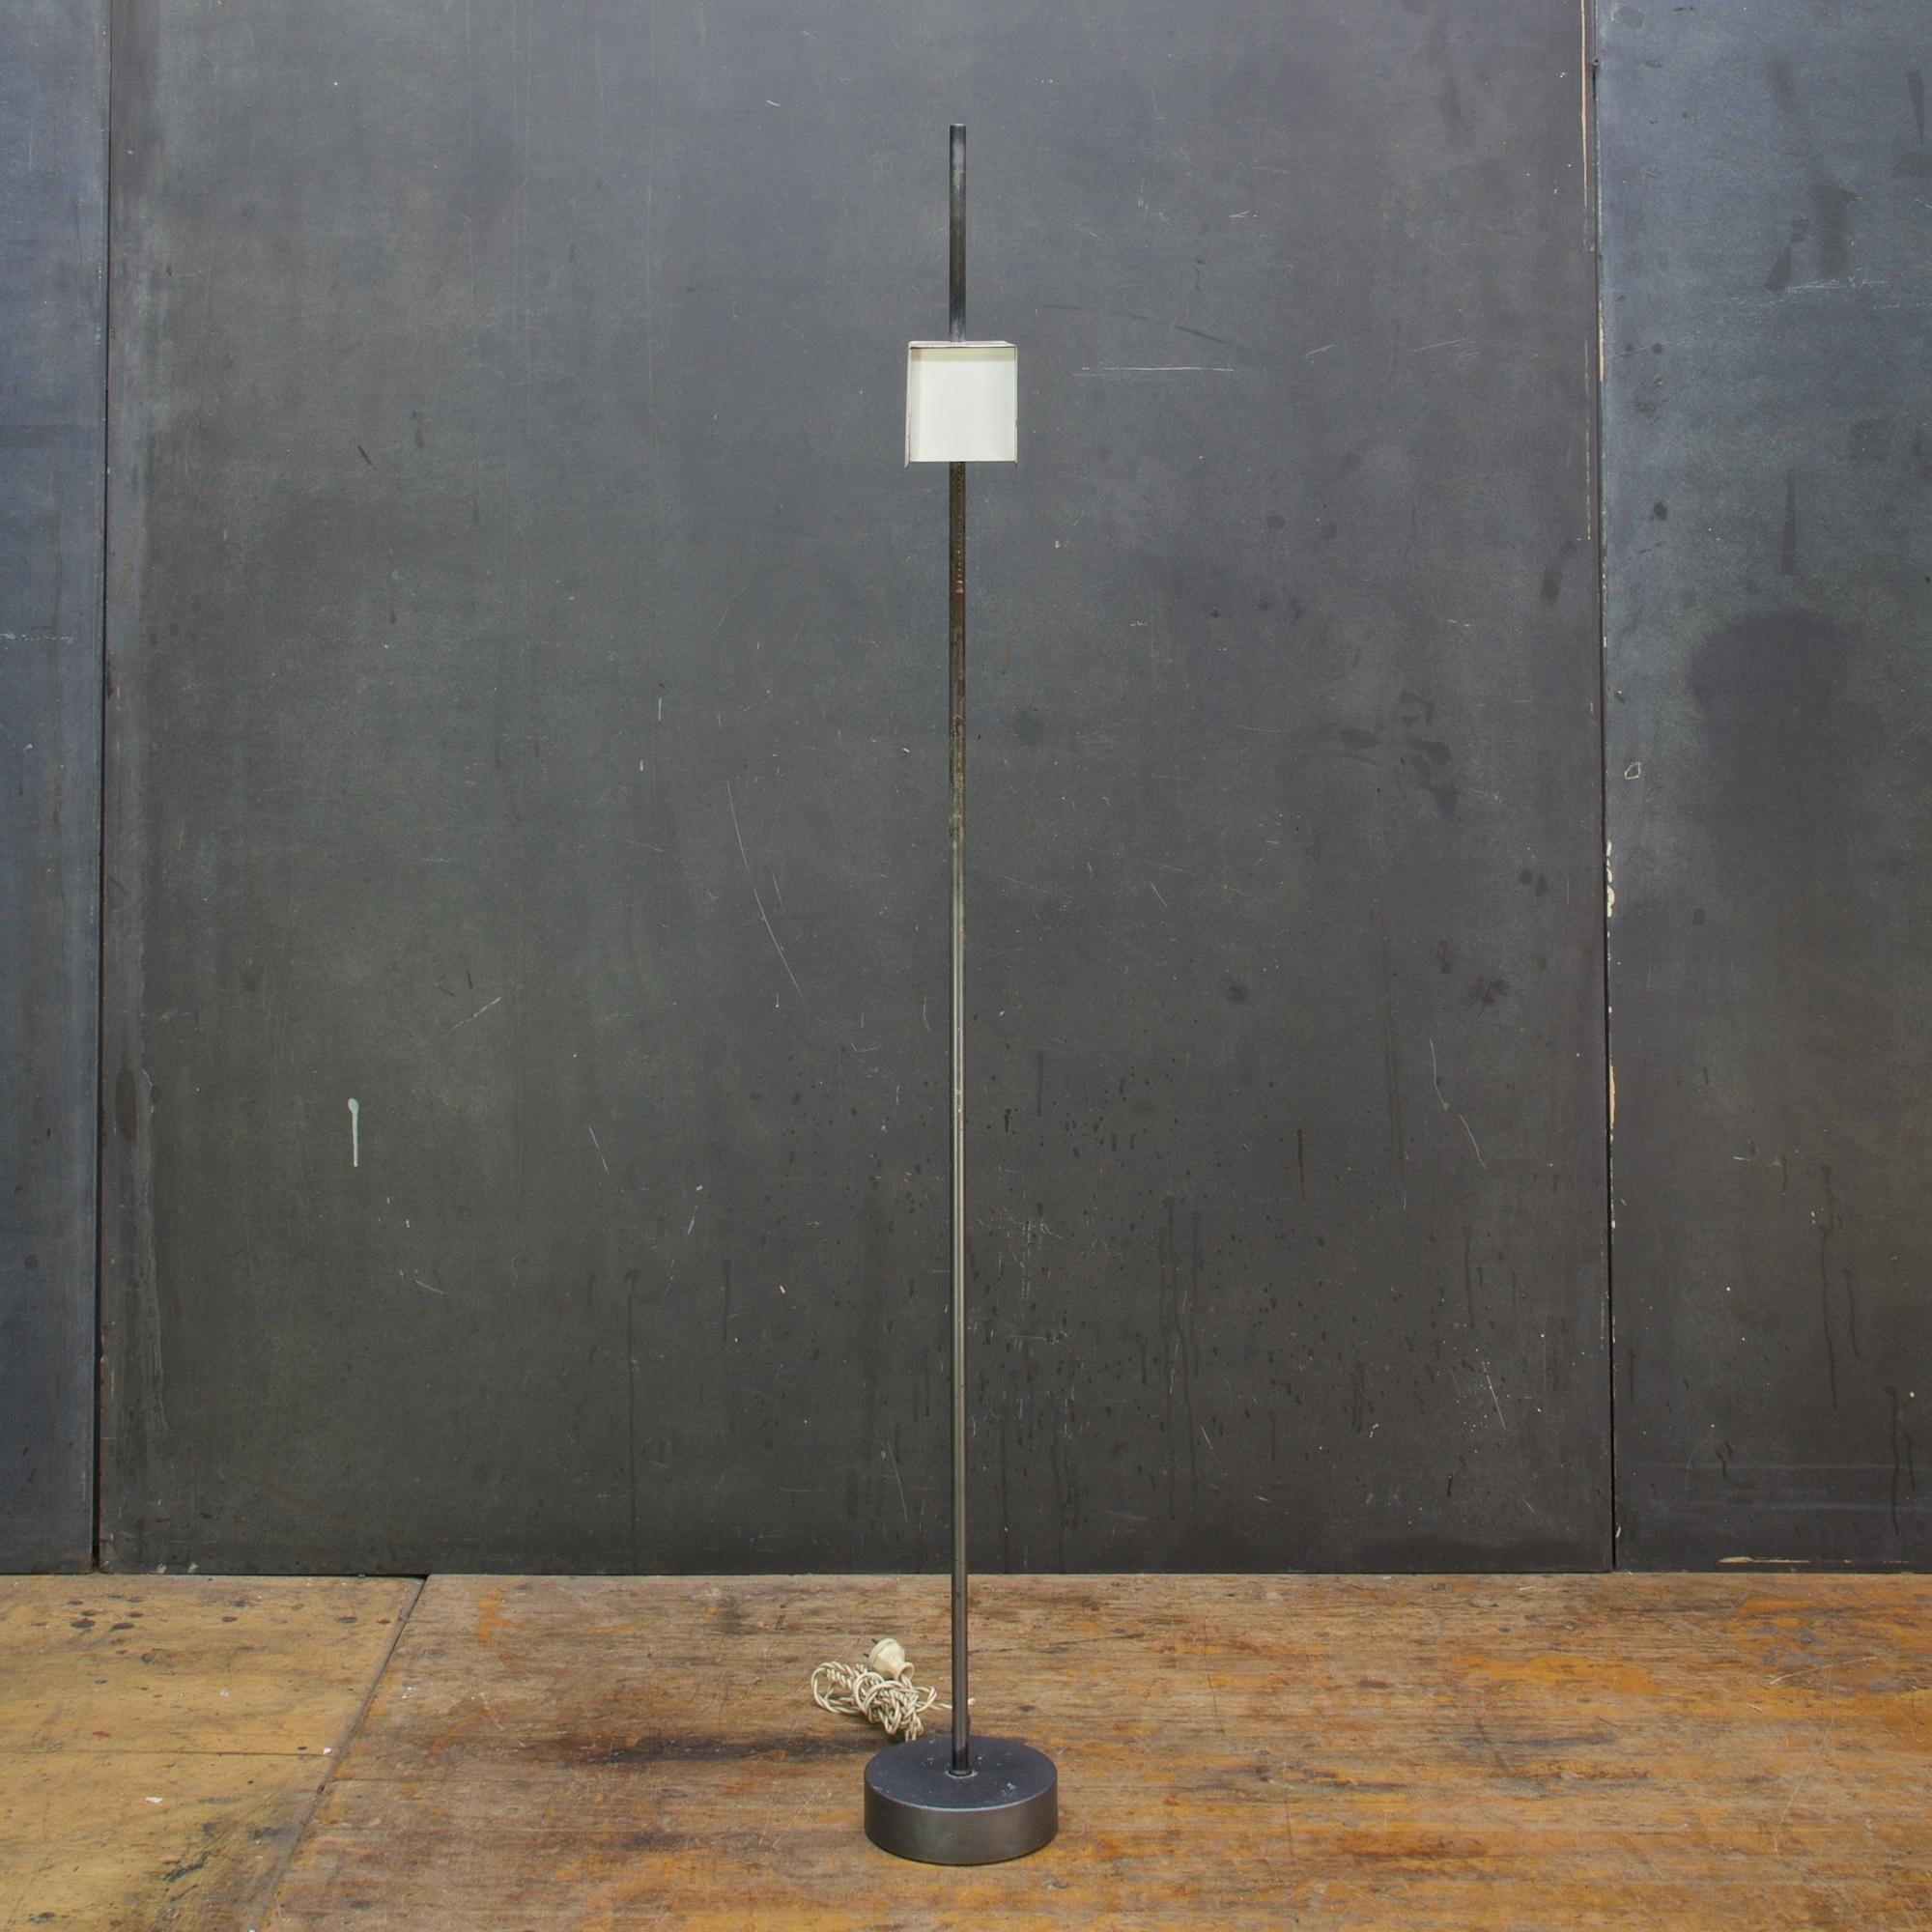 Heavily patinated and worn minimalist floor lamp by the Swedish master, Hans Ange Jakobsson. Right out of the old original owner estate. Sold as-is, lost of wear all around, this lamp was well used and loved. Fully functional, with smooth pull